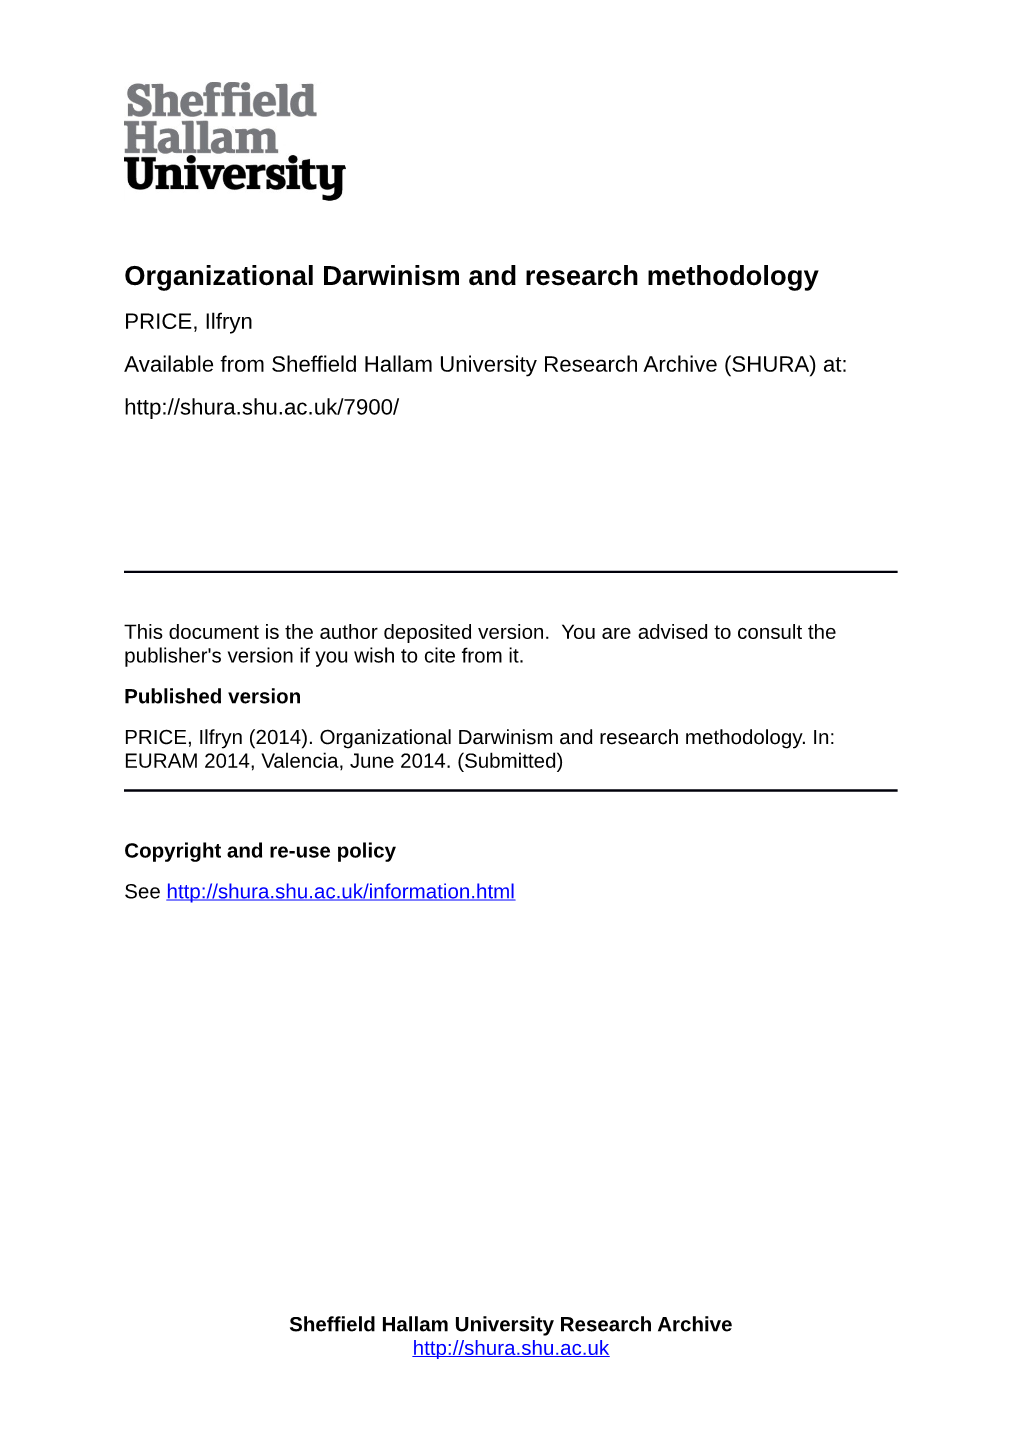 Organizational Darwinism and Research Methodology PRICE, Ilfryn Available from Sheffield Hallam University Research Archive (SHURA) At